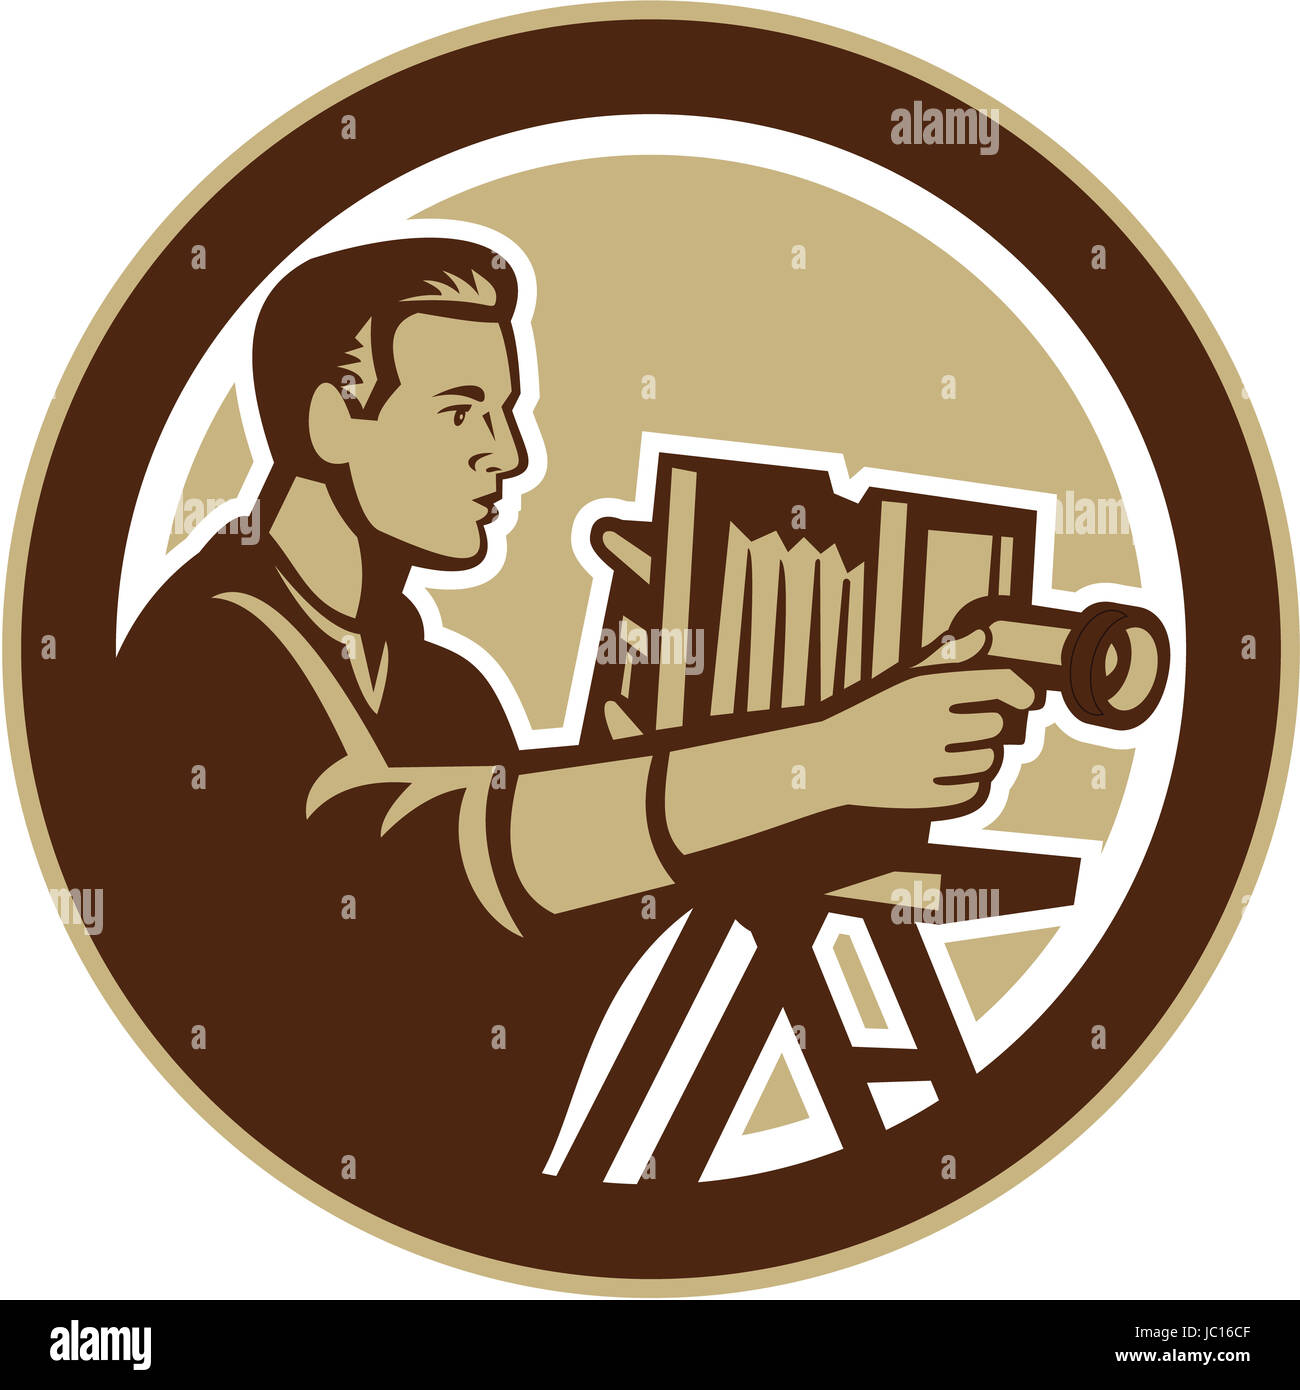 Illustration of a photographer shooting with vintage bellows camera done in retro woodcut style set inside circle. Stock Photo